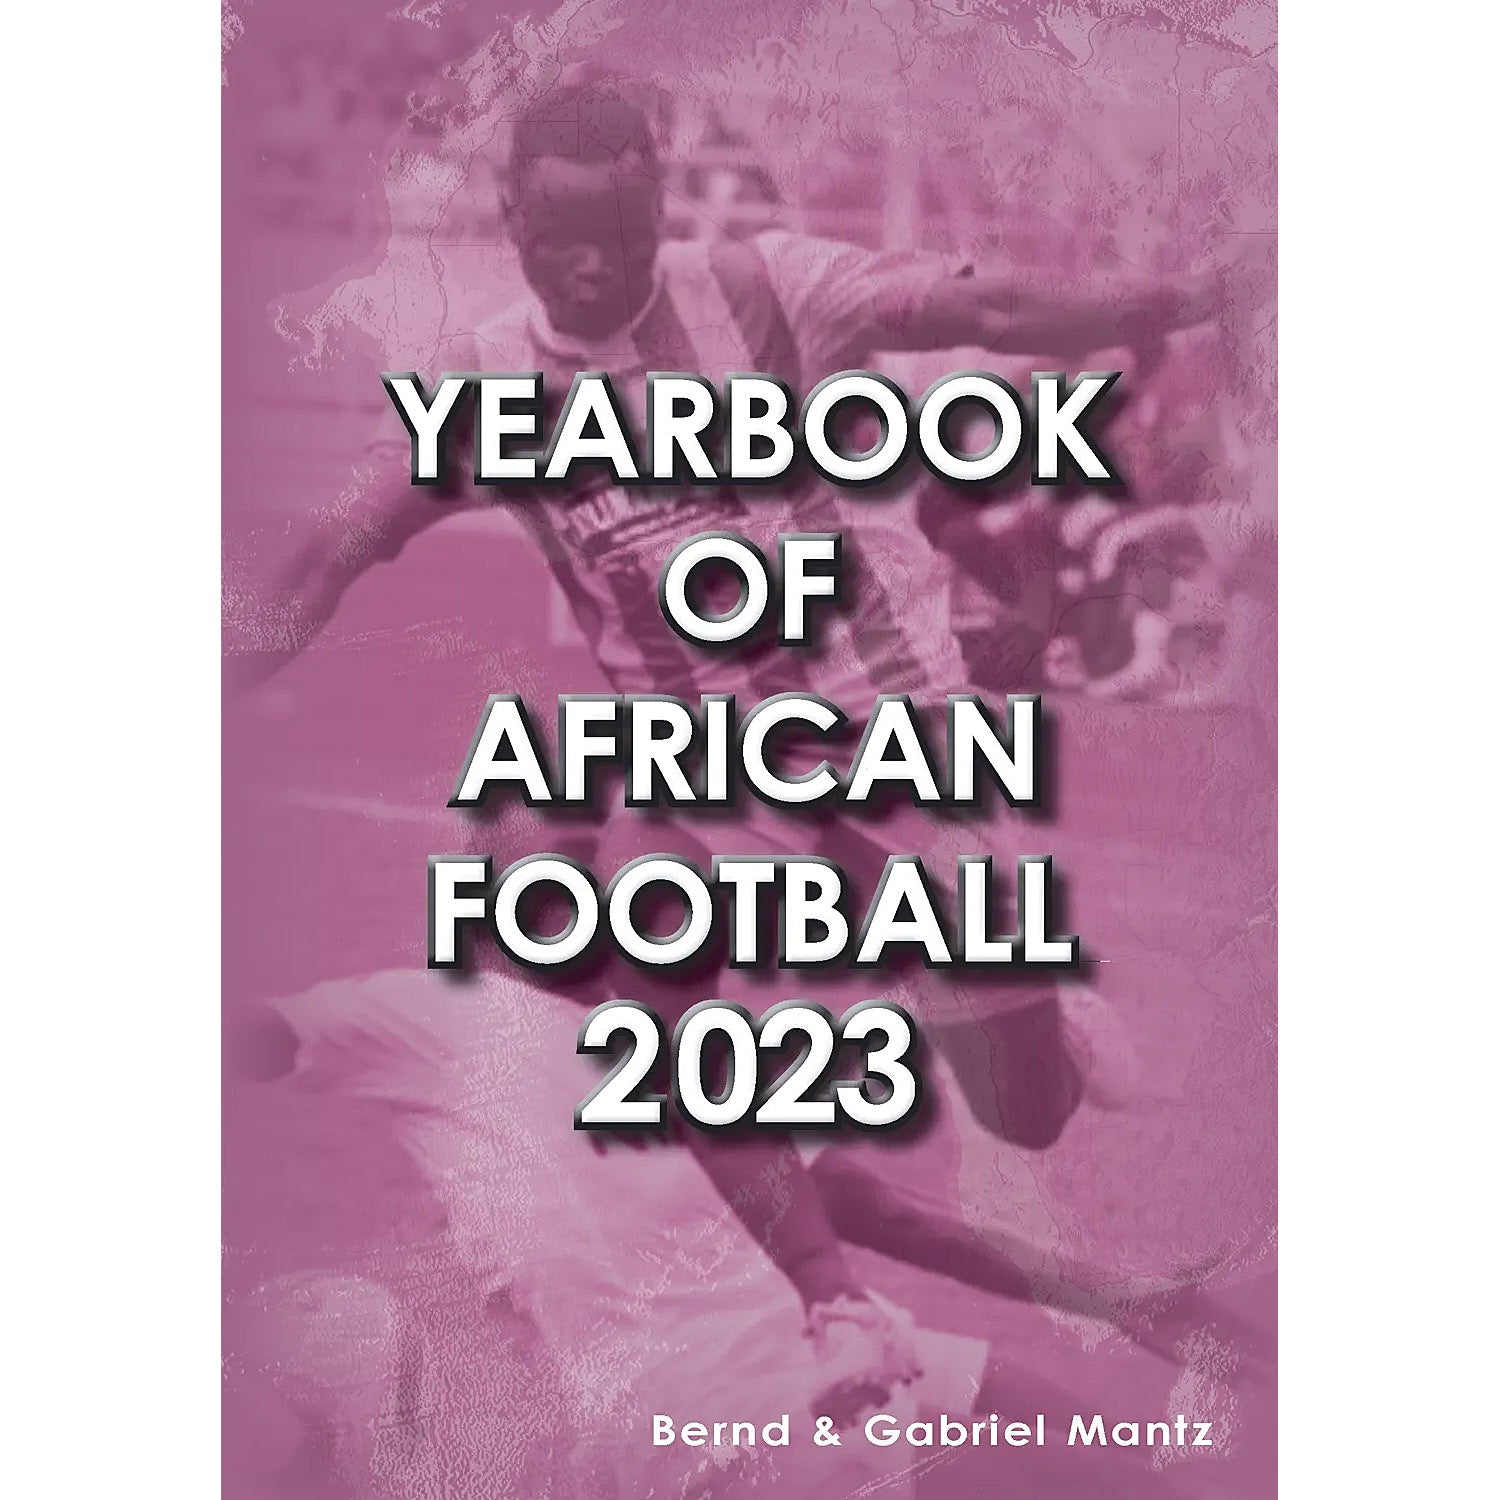 African Yearbooks